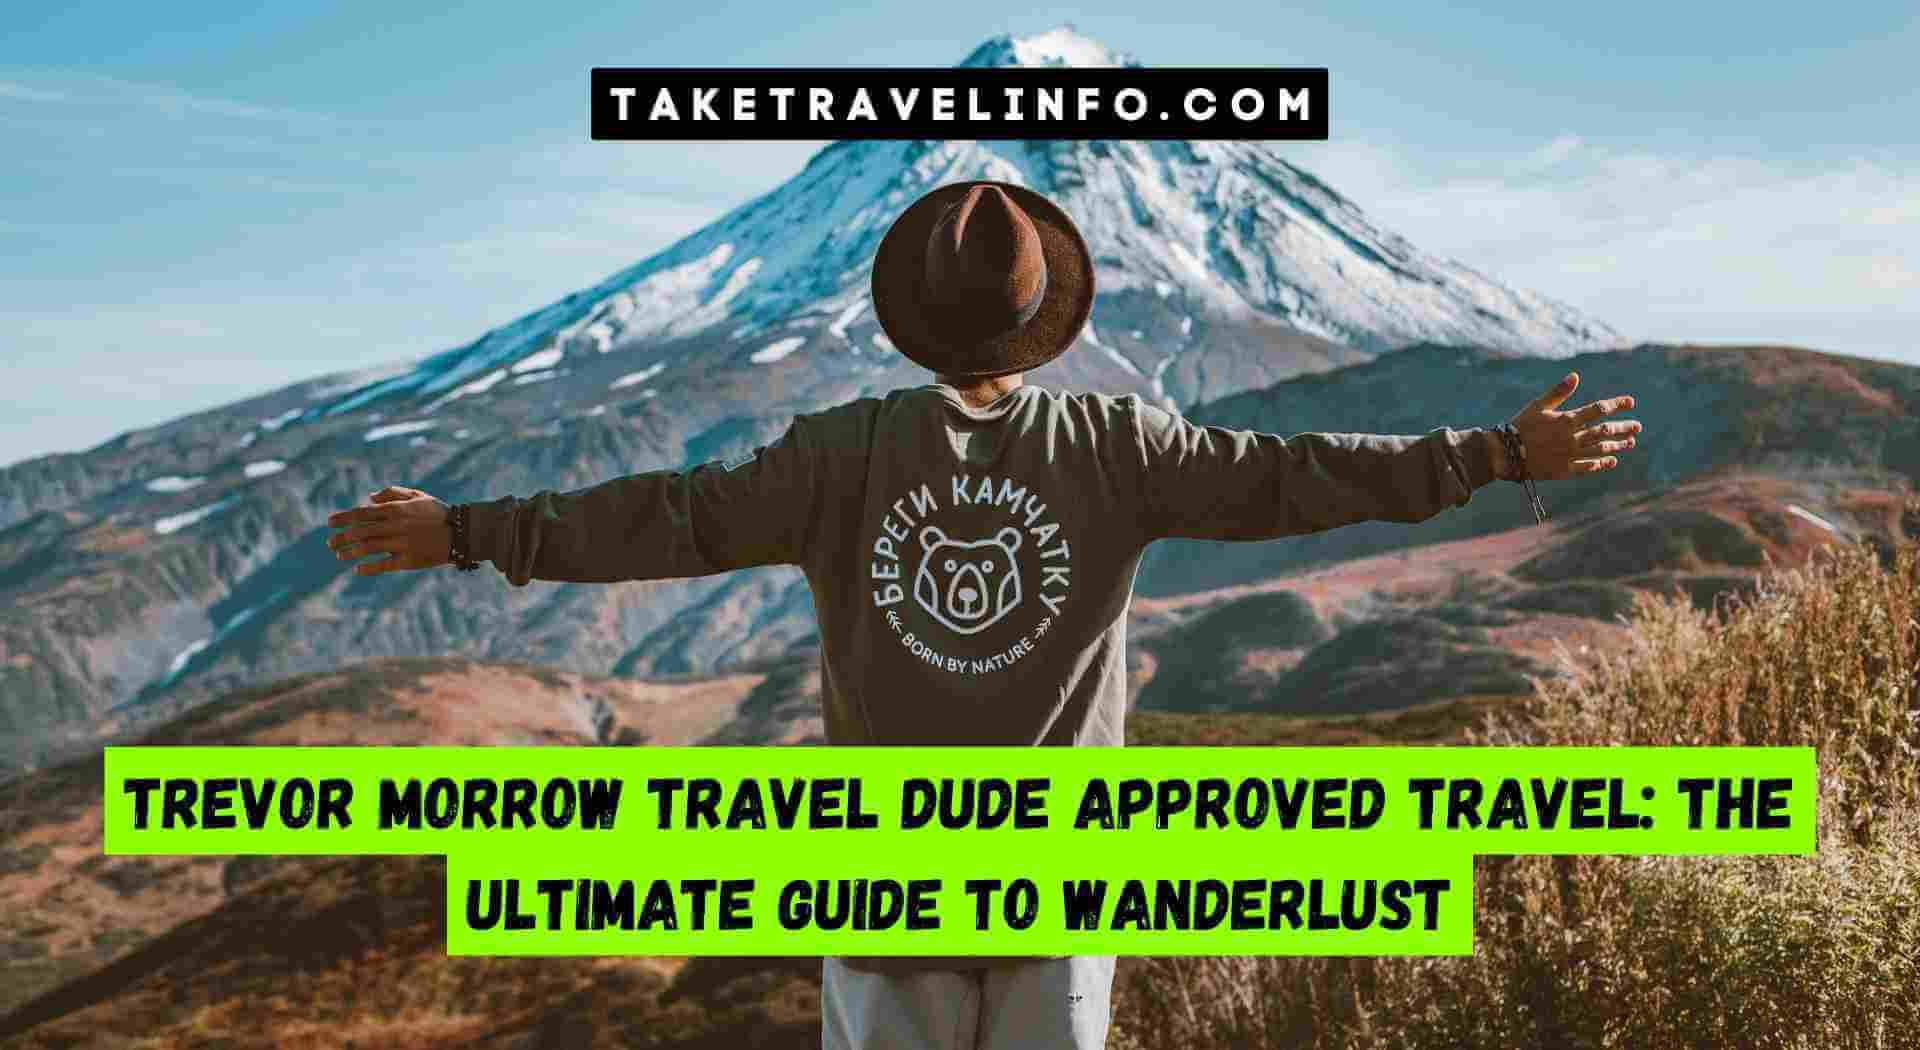 Trevor Morrow Travel Dude Approved Travel: The Ultimate Guide to Wanderlust